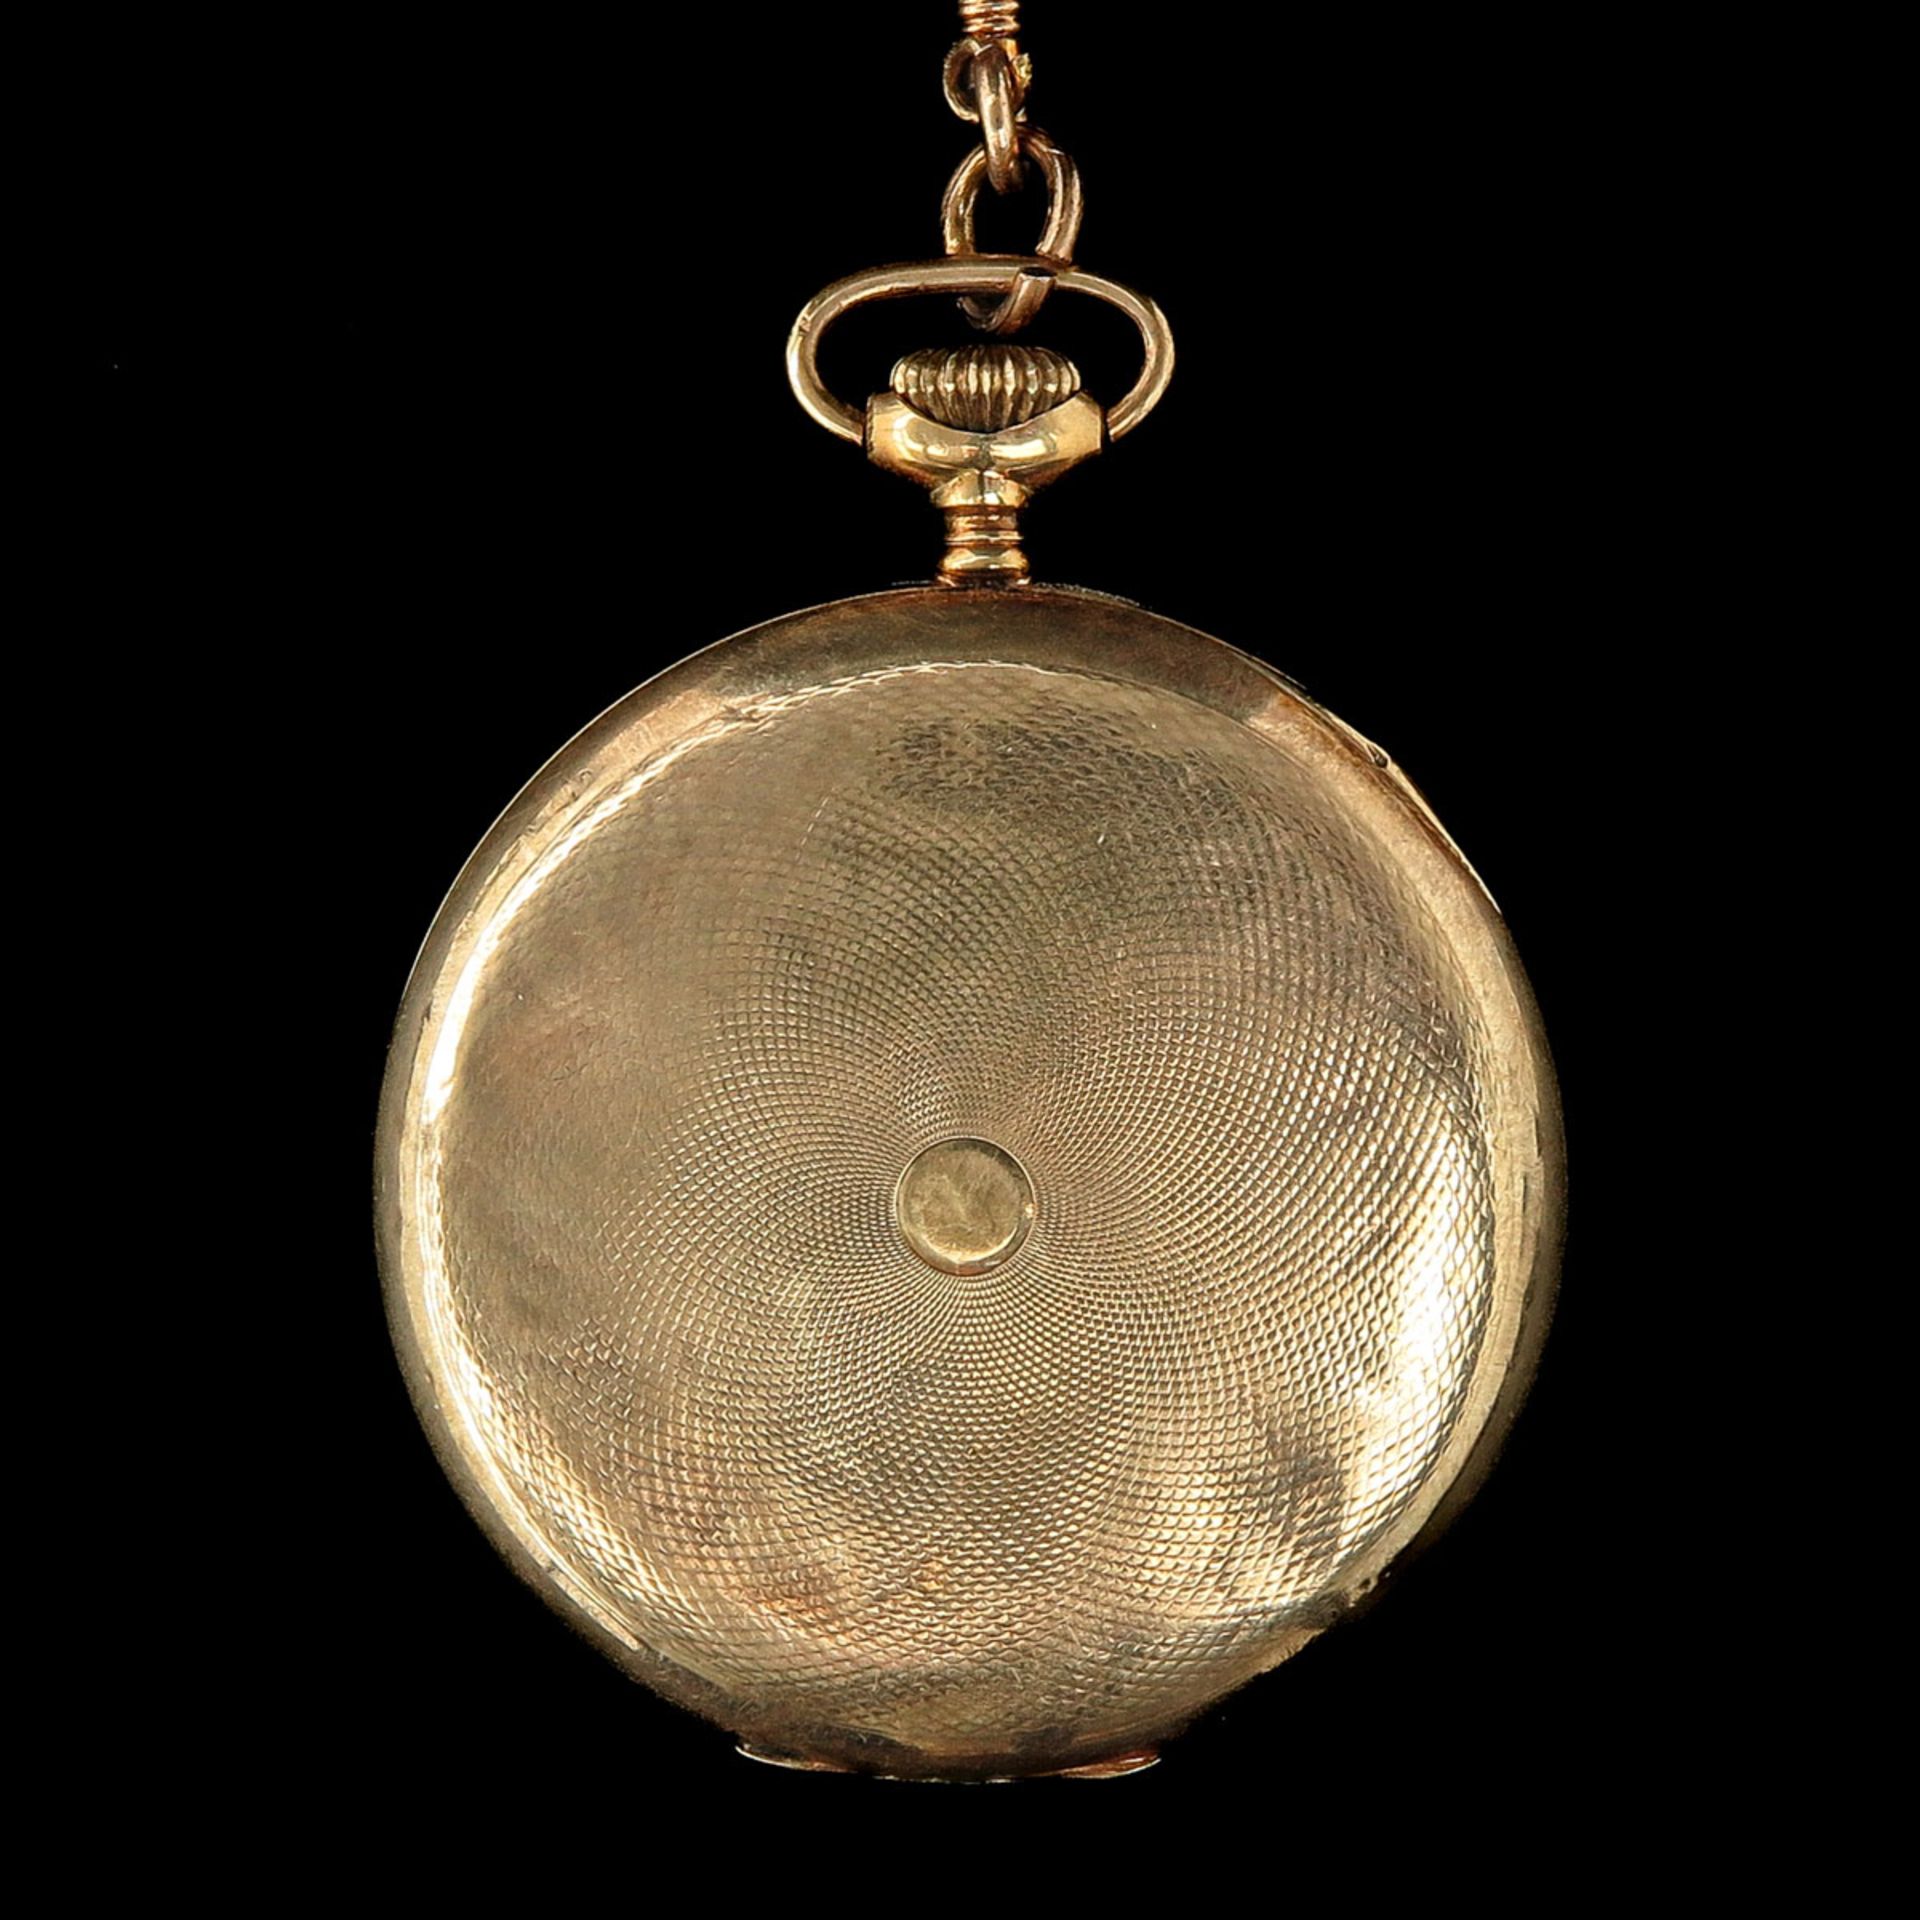 A Pocket Watch Holder with Pocket Watch - Image 5 of 7